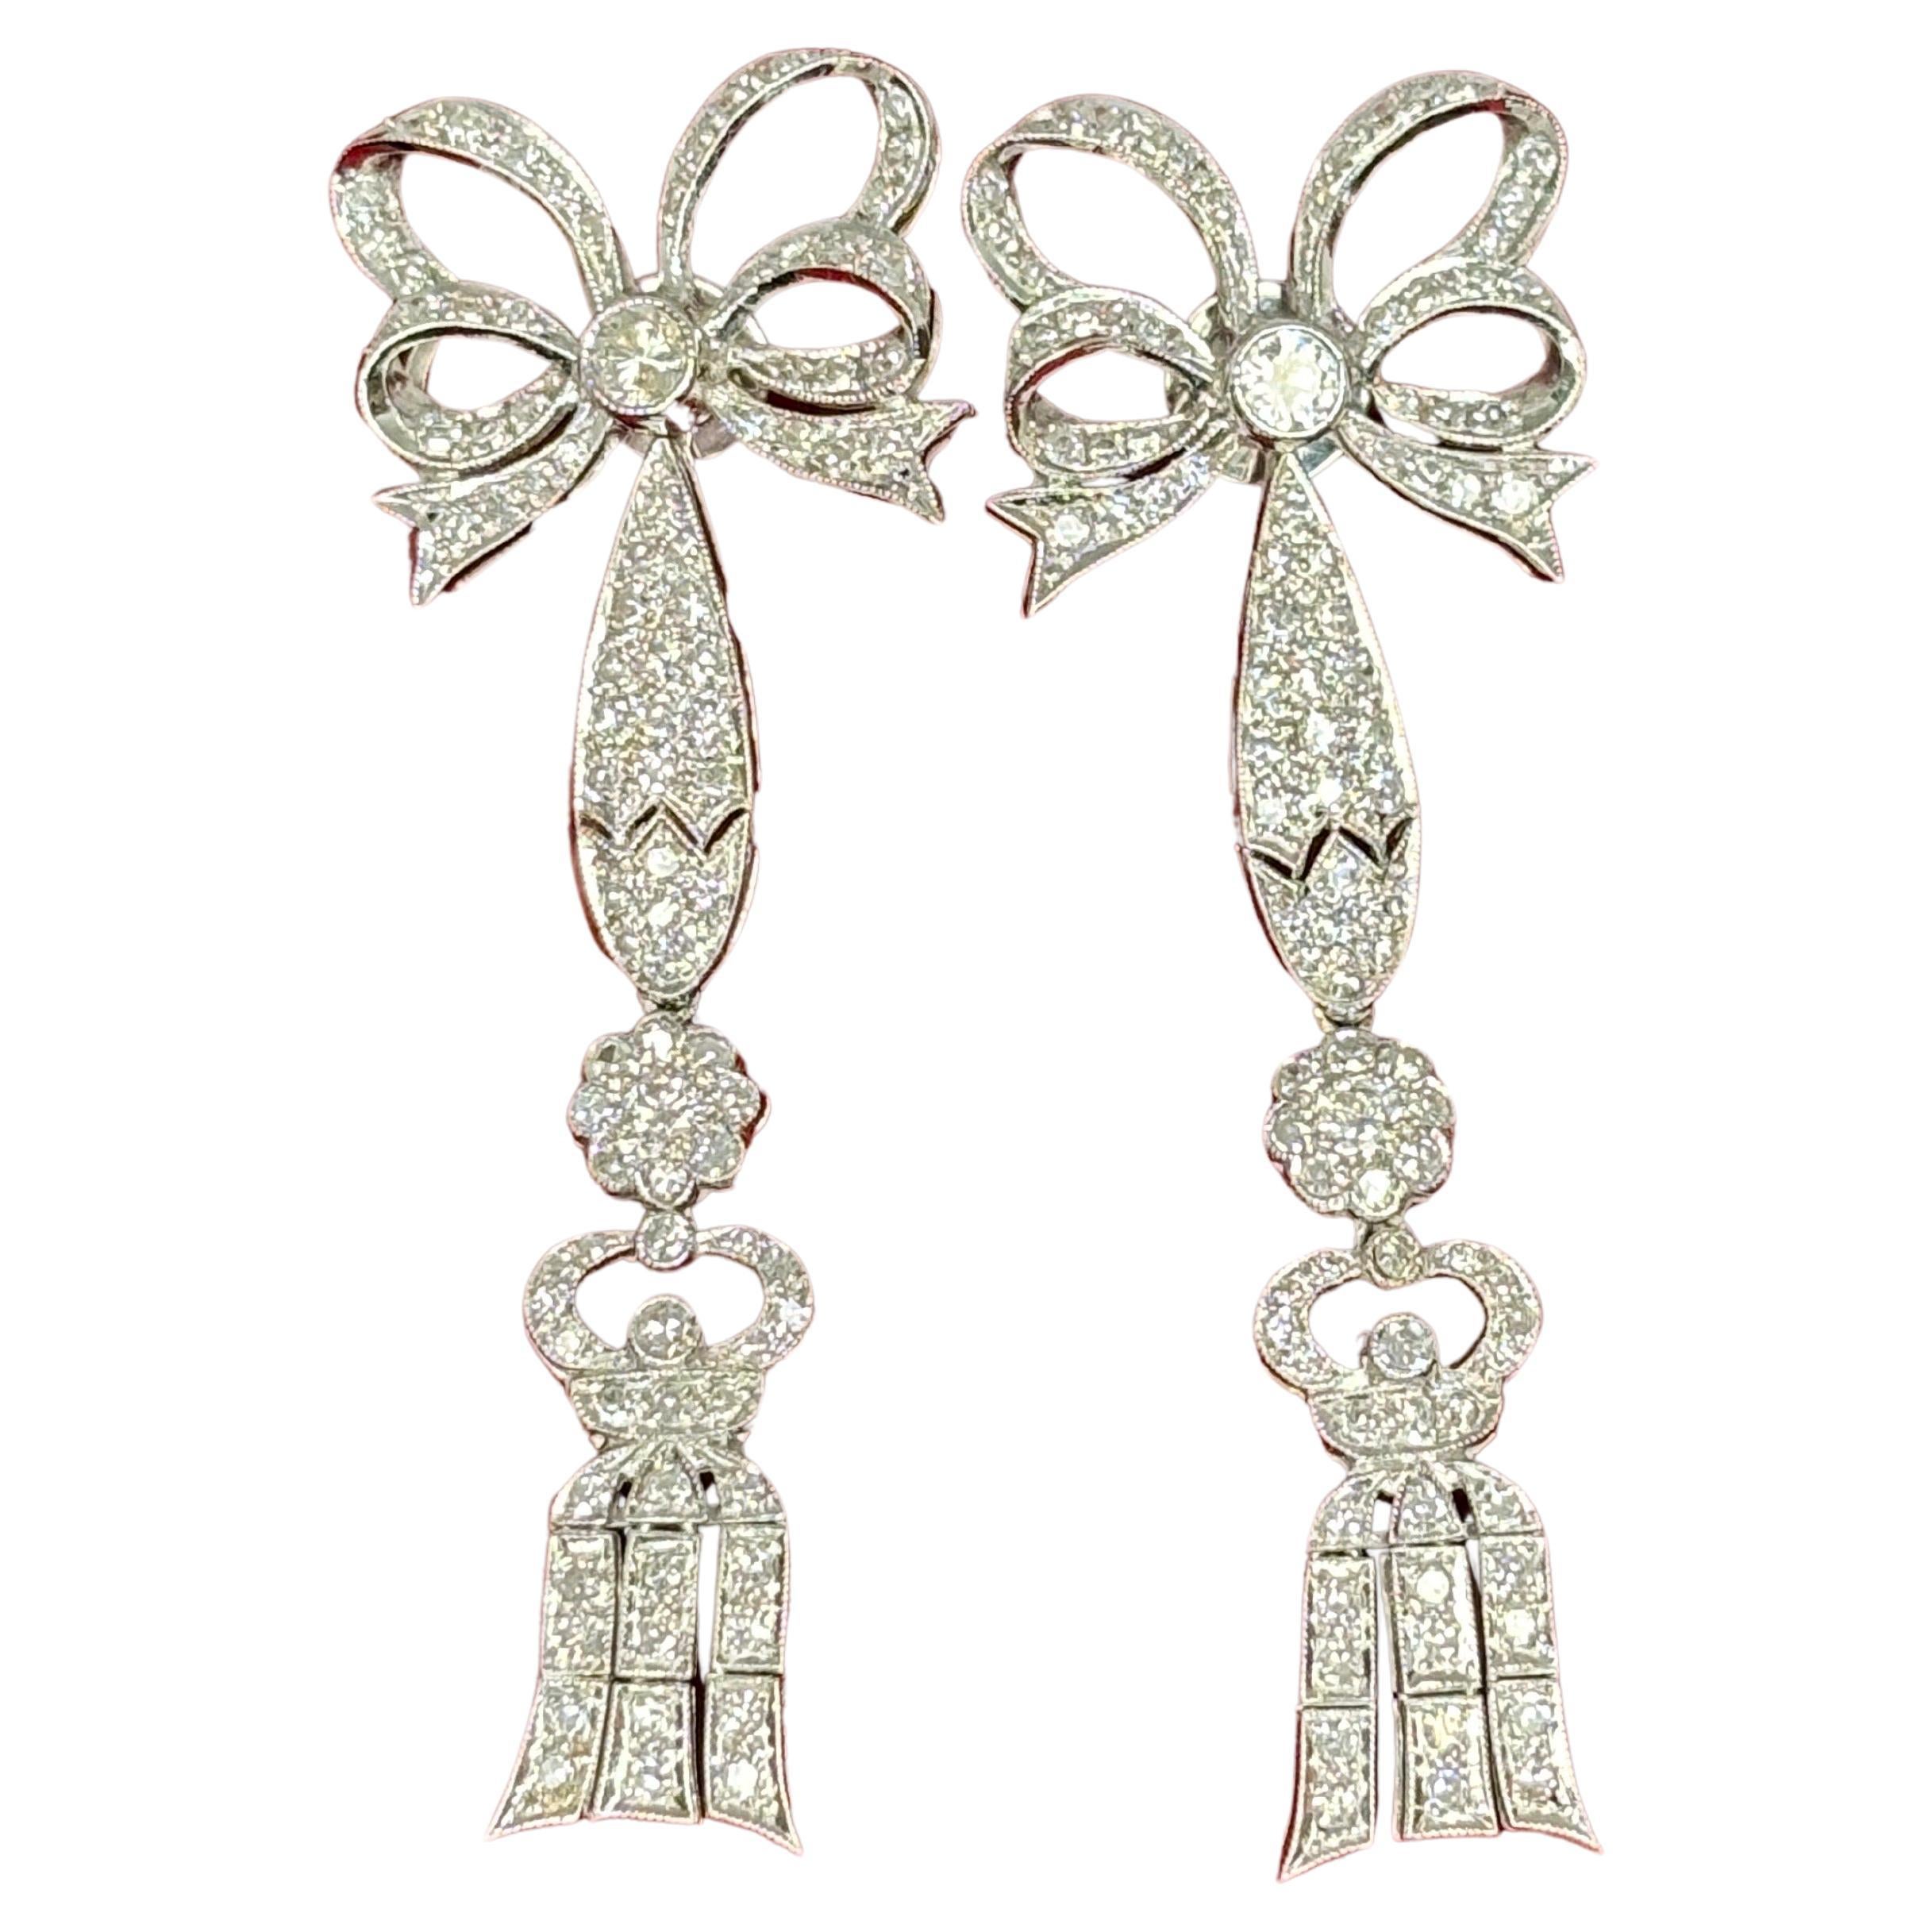 These unique multi-use 18k white gold earrings with diamonds are crafted in a stunning edwardian bow and tassel design and are the epitome of versatility and luxury.

Expertly crafted with round brilliant cut and single cut diamonds, for those who